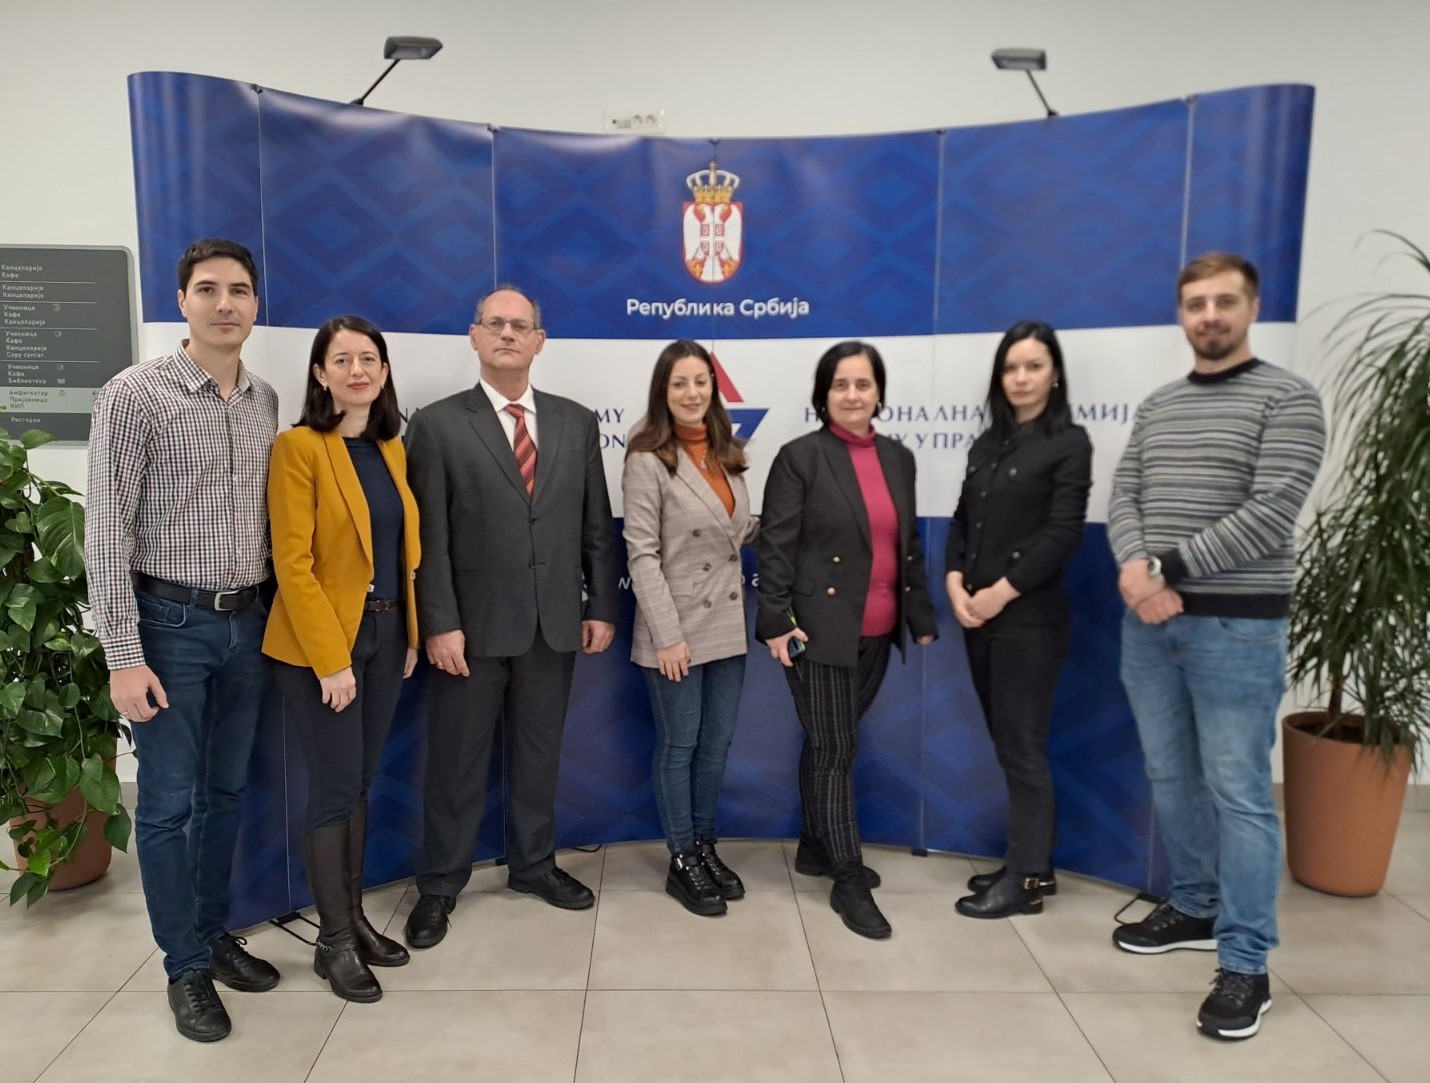 RETURN VISIT OF THE REPRESENTATIVES OF THE ROMANIAN INSTITUTE TO THE ACADEMY